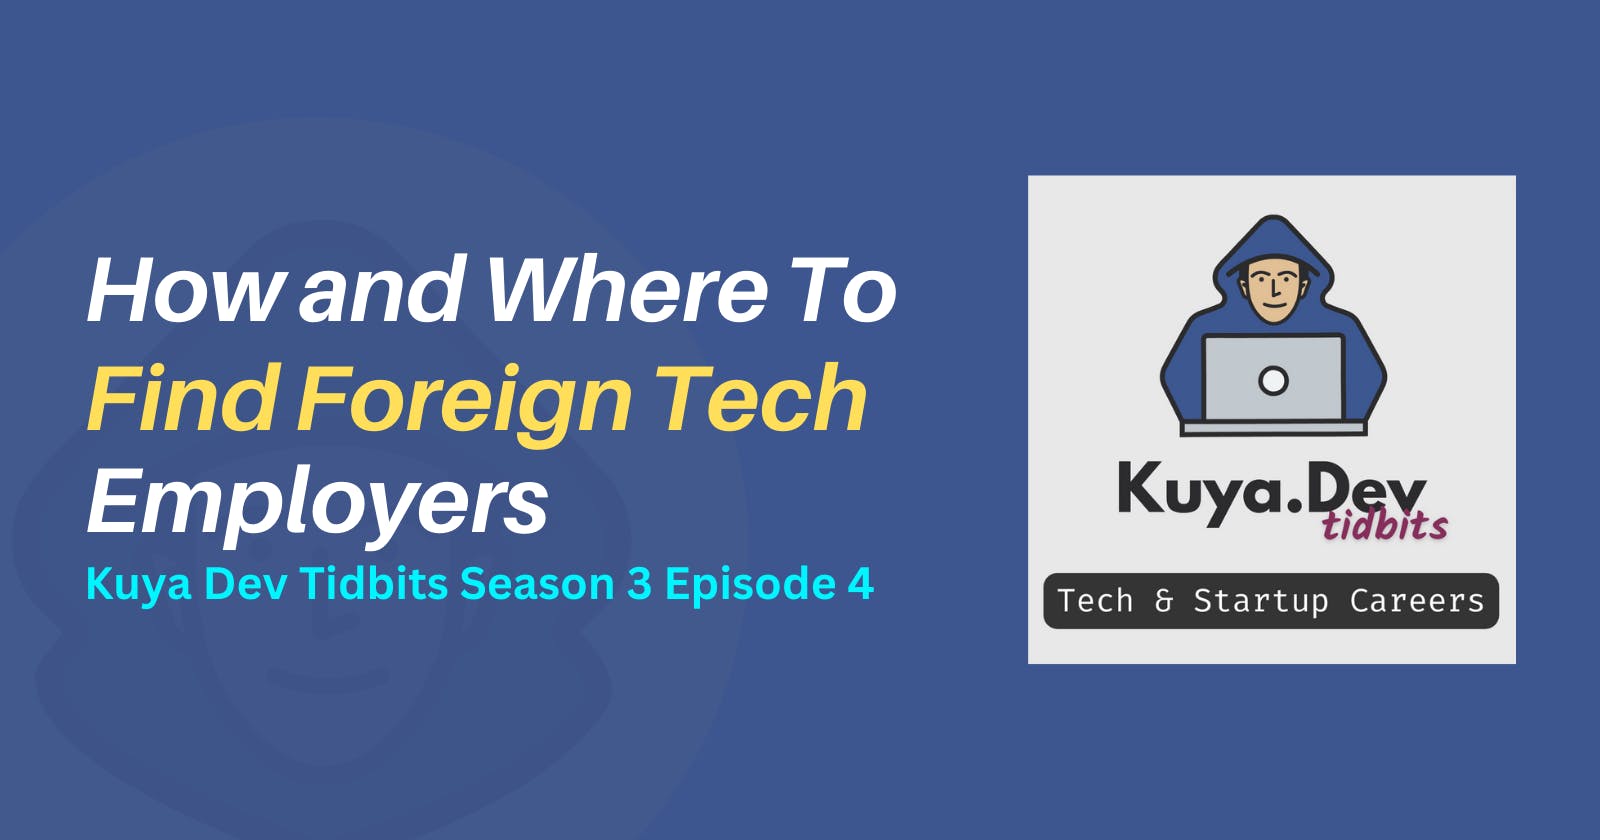 How and Where to Find Foreign Tech Employers